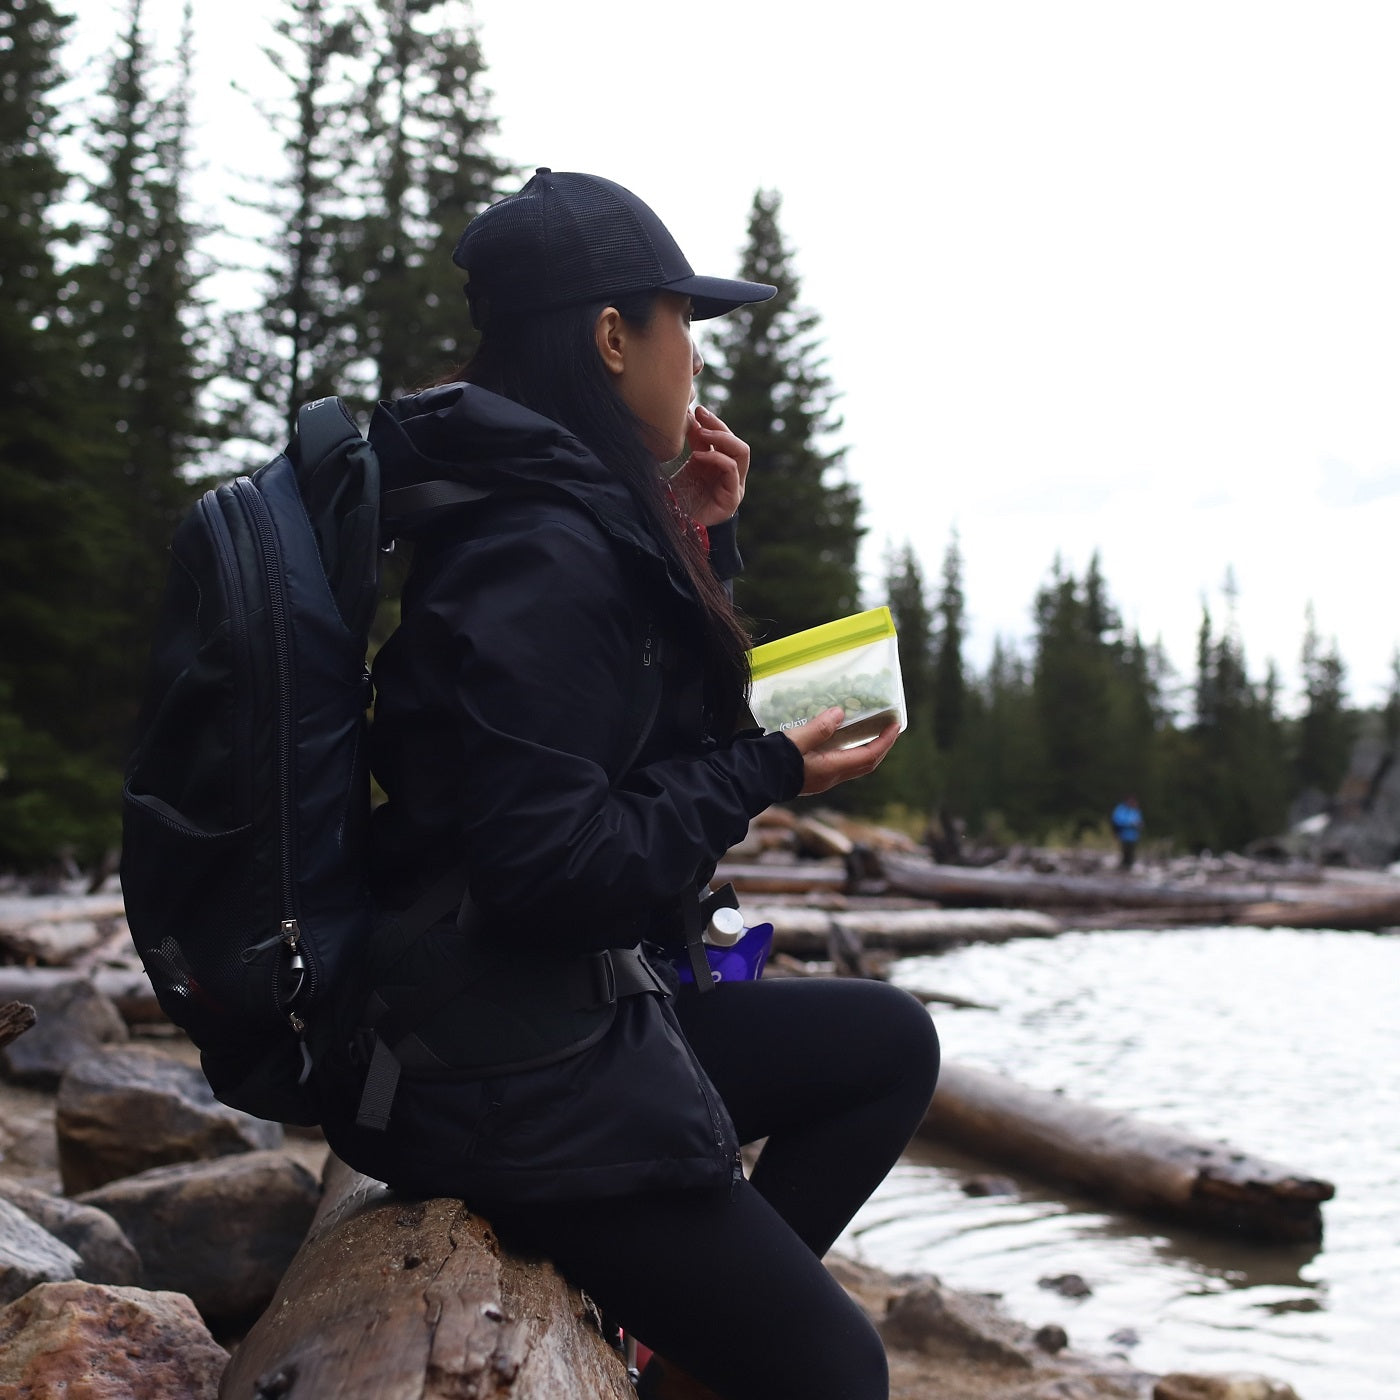 lightweight reusable food storage snack bag perfect for hiking, trekking and on the go snacks.